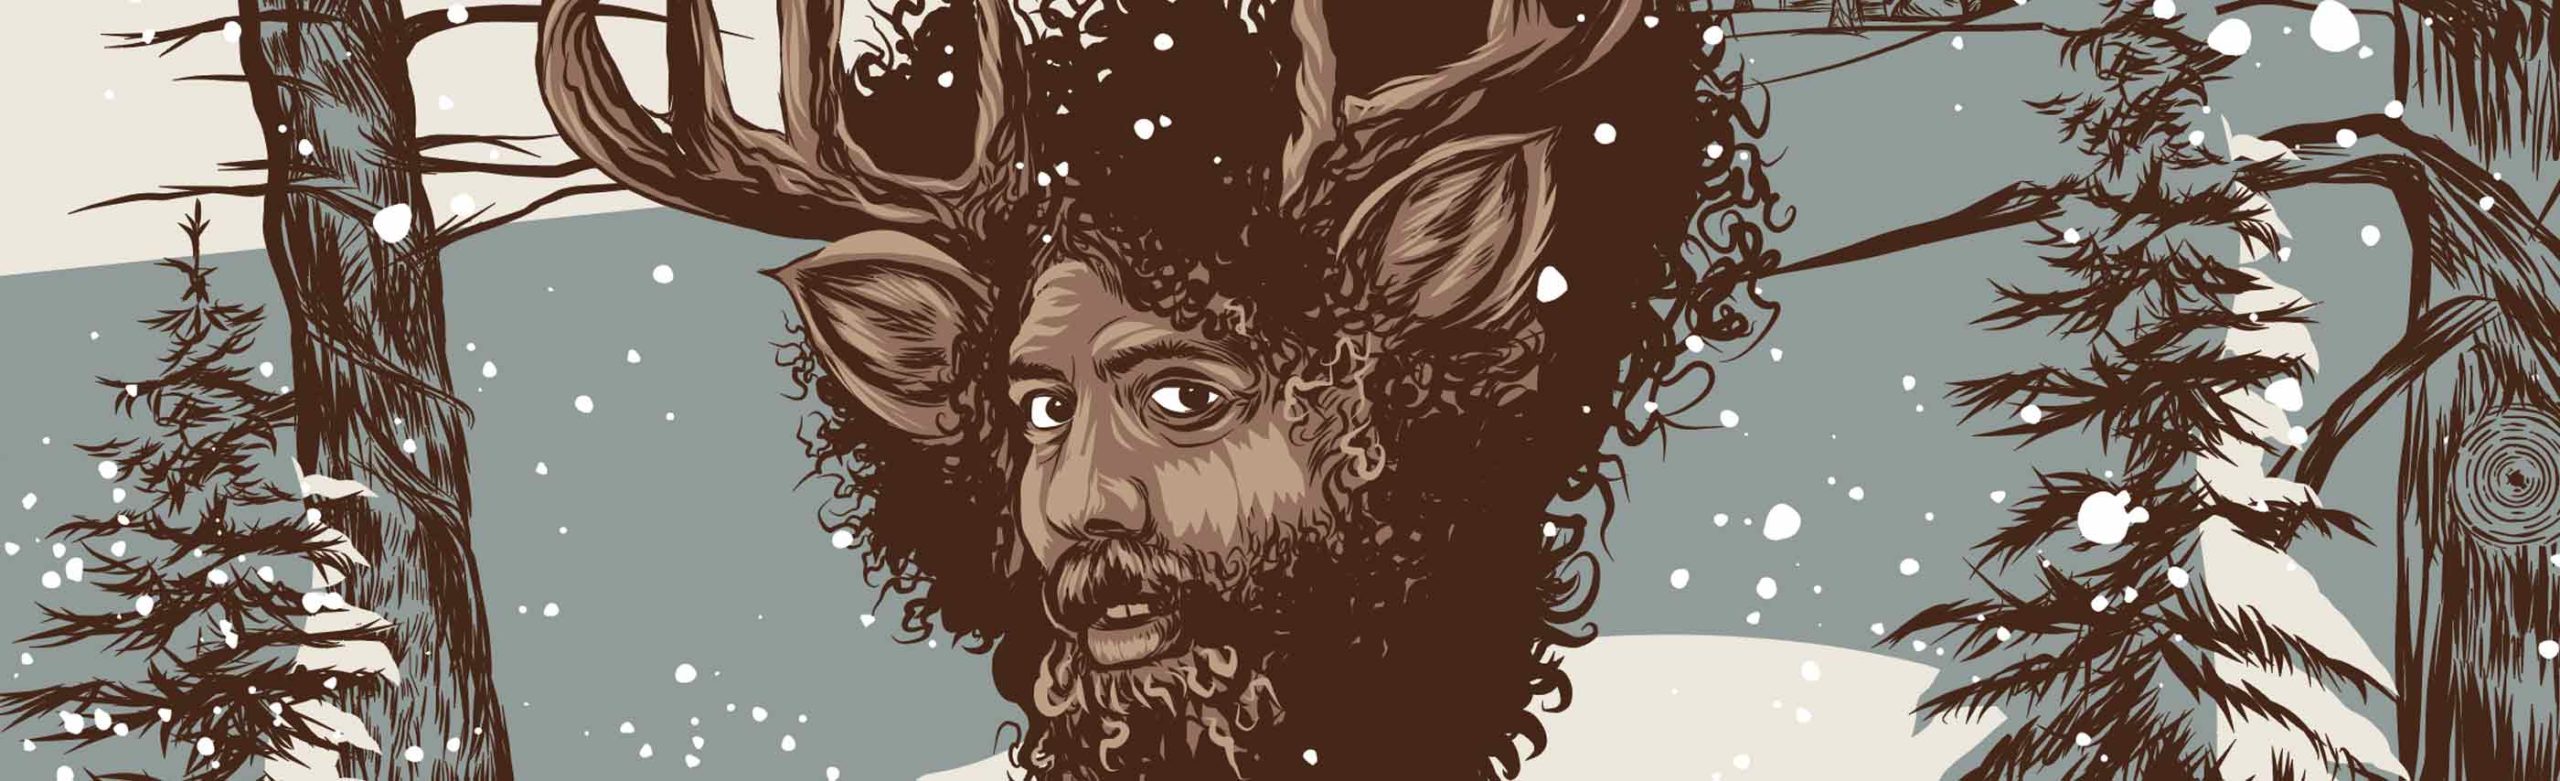 Custom Limited Edition Screenprint for Reggie Watts at the Wilma Image